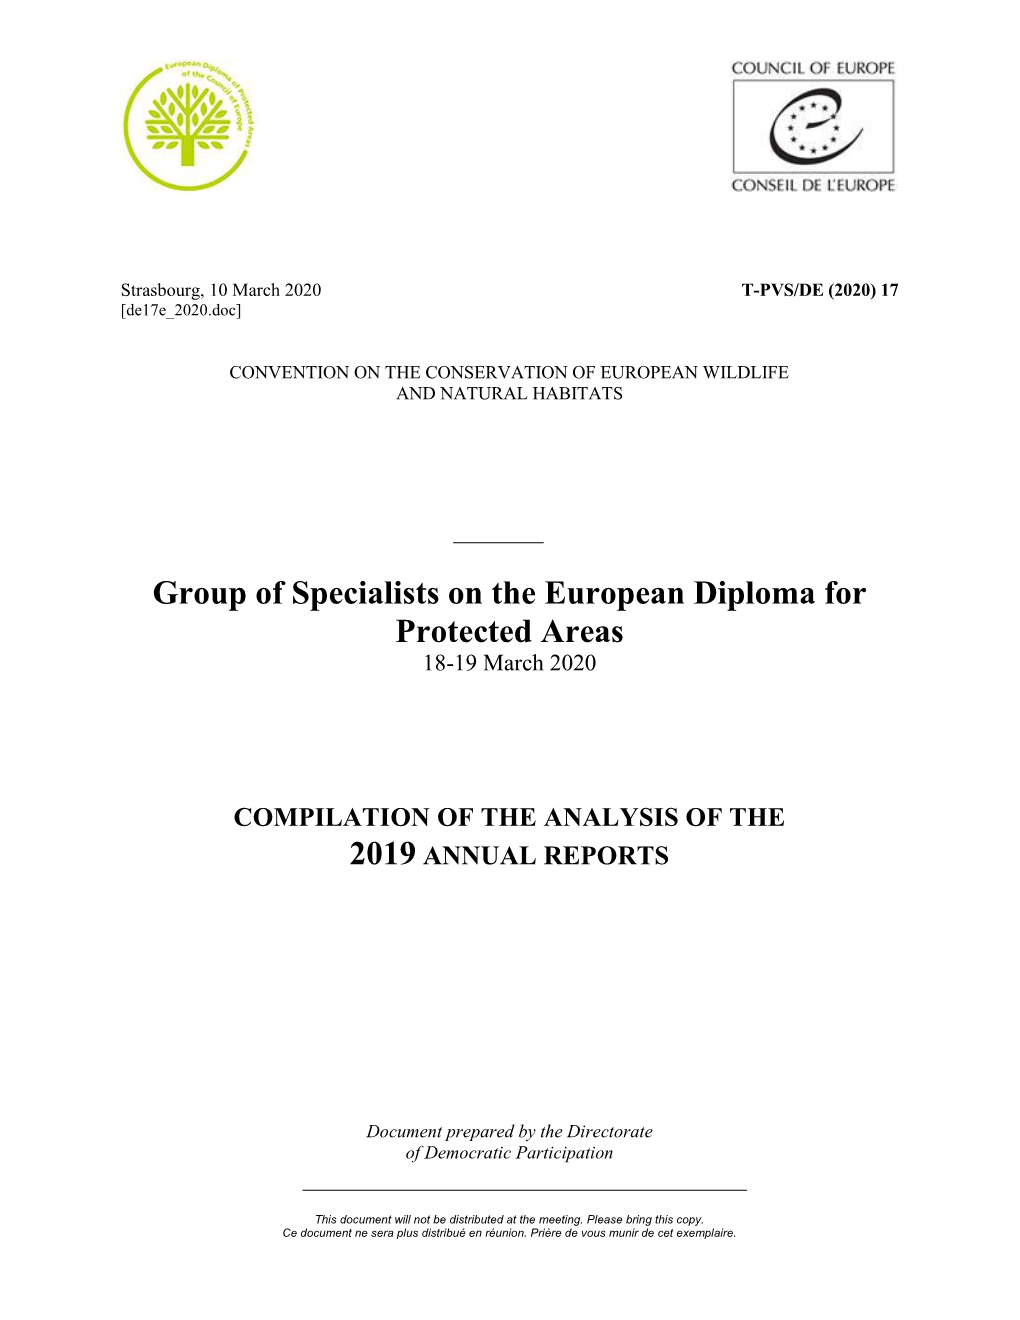 Group of Specialists on the European Diploma for Protected Areas 18-19 March 2020